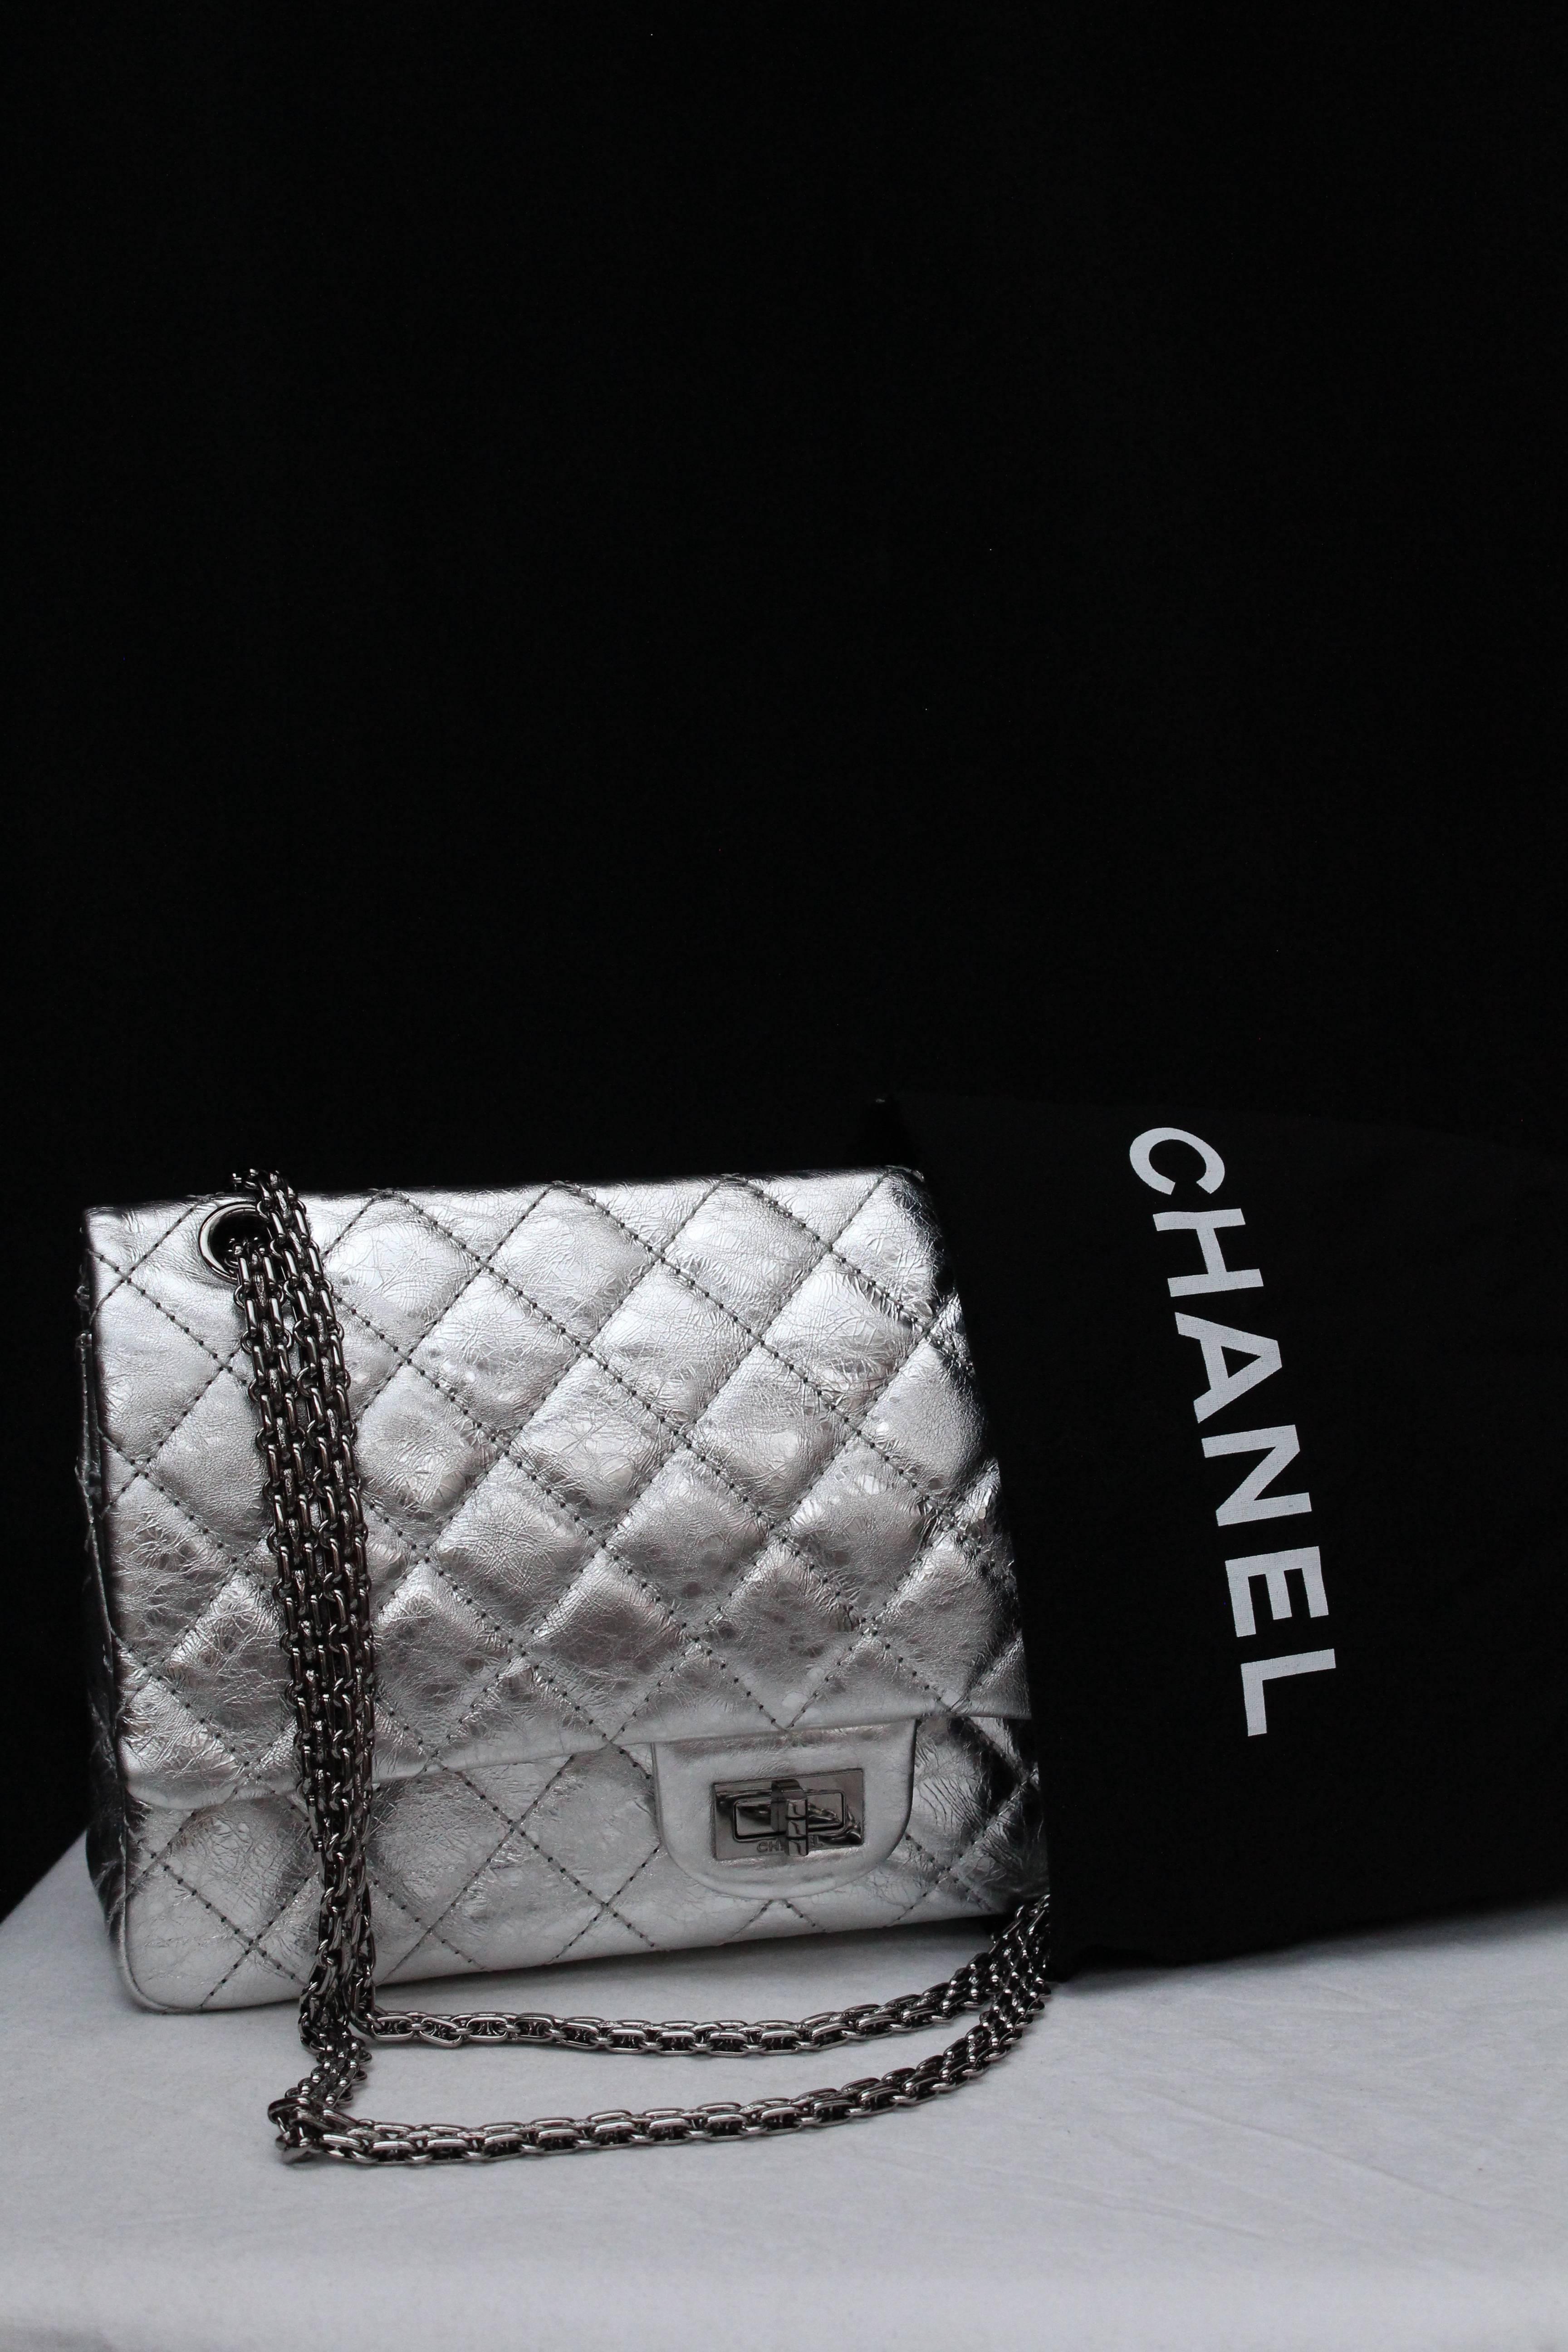 CHANEL (Made in France) 2.55 Model bag made of quilted silvery leather with ruched/marbling effect. It can be worn double over the shoulder or single as cross-body bag. Back patch pocket. Silver plated twist lock clasp closure. The first flap has a